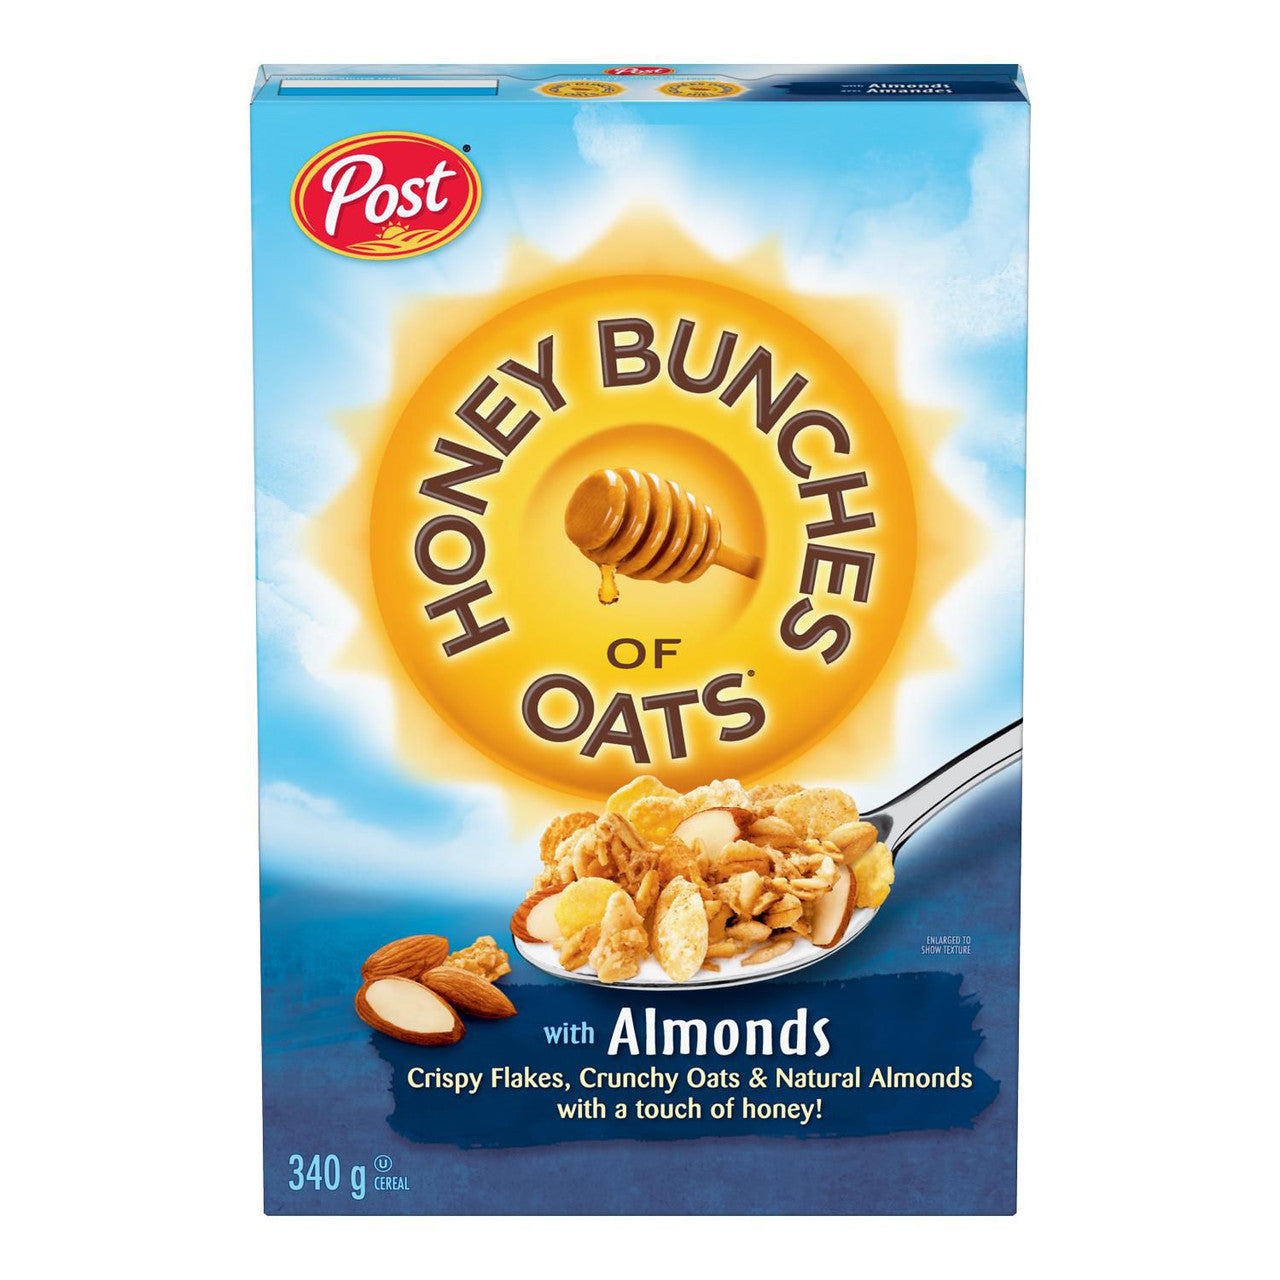 Post Honey Bunches of Oats with Almonds Cereal, 340g/12 oz. Box {Imported from Canada}